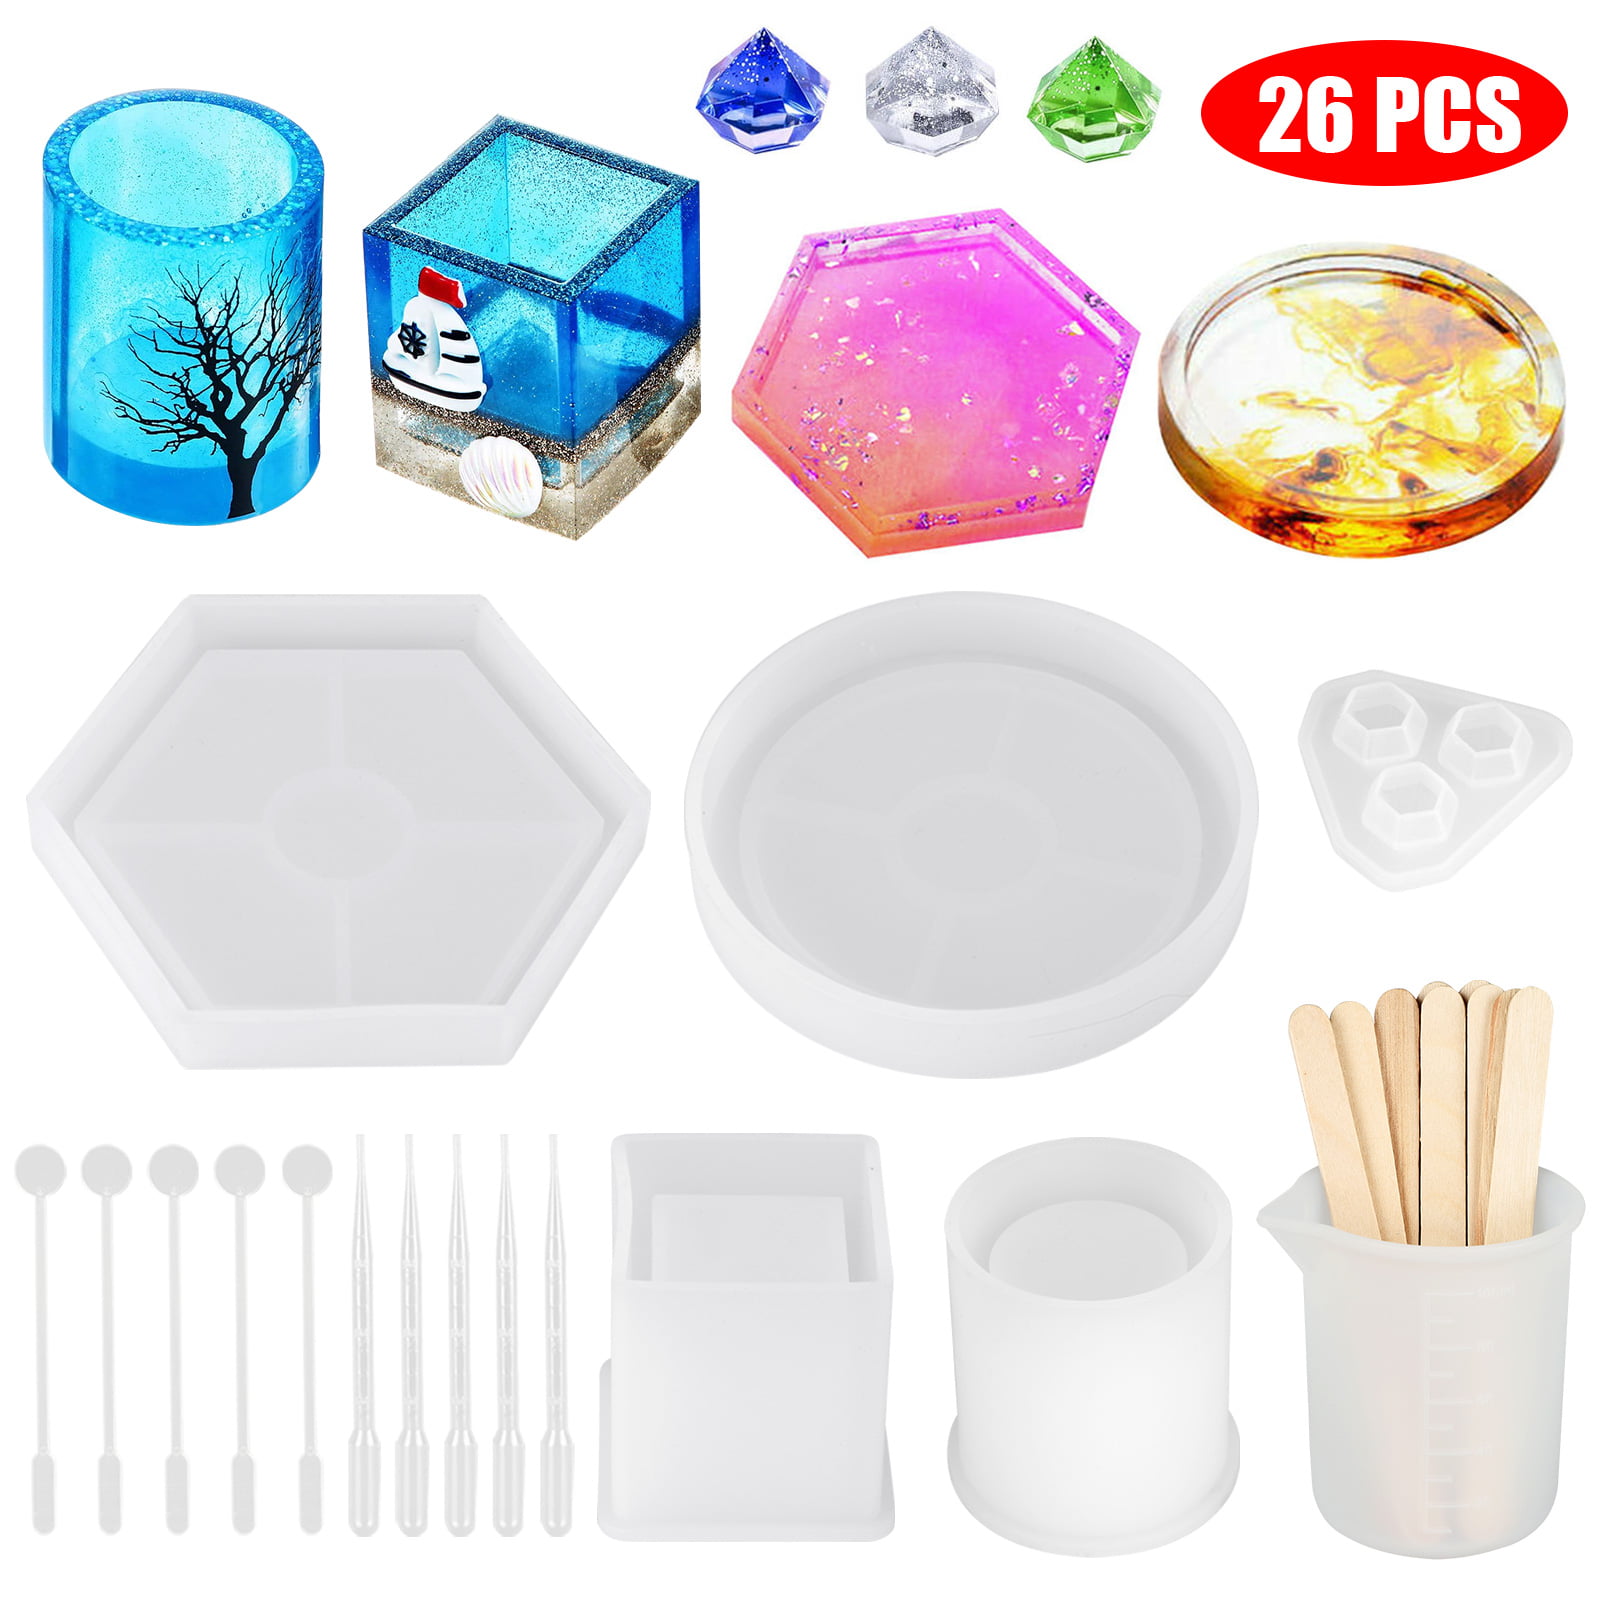 DIY Coaster Resin Casting Mold Silicone Making Epoxy Mould Craft DIY Clay Tool